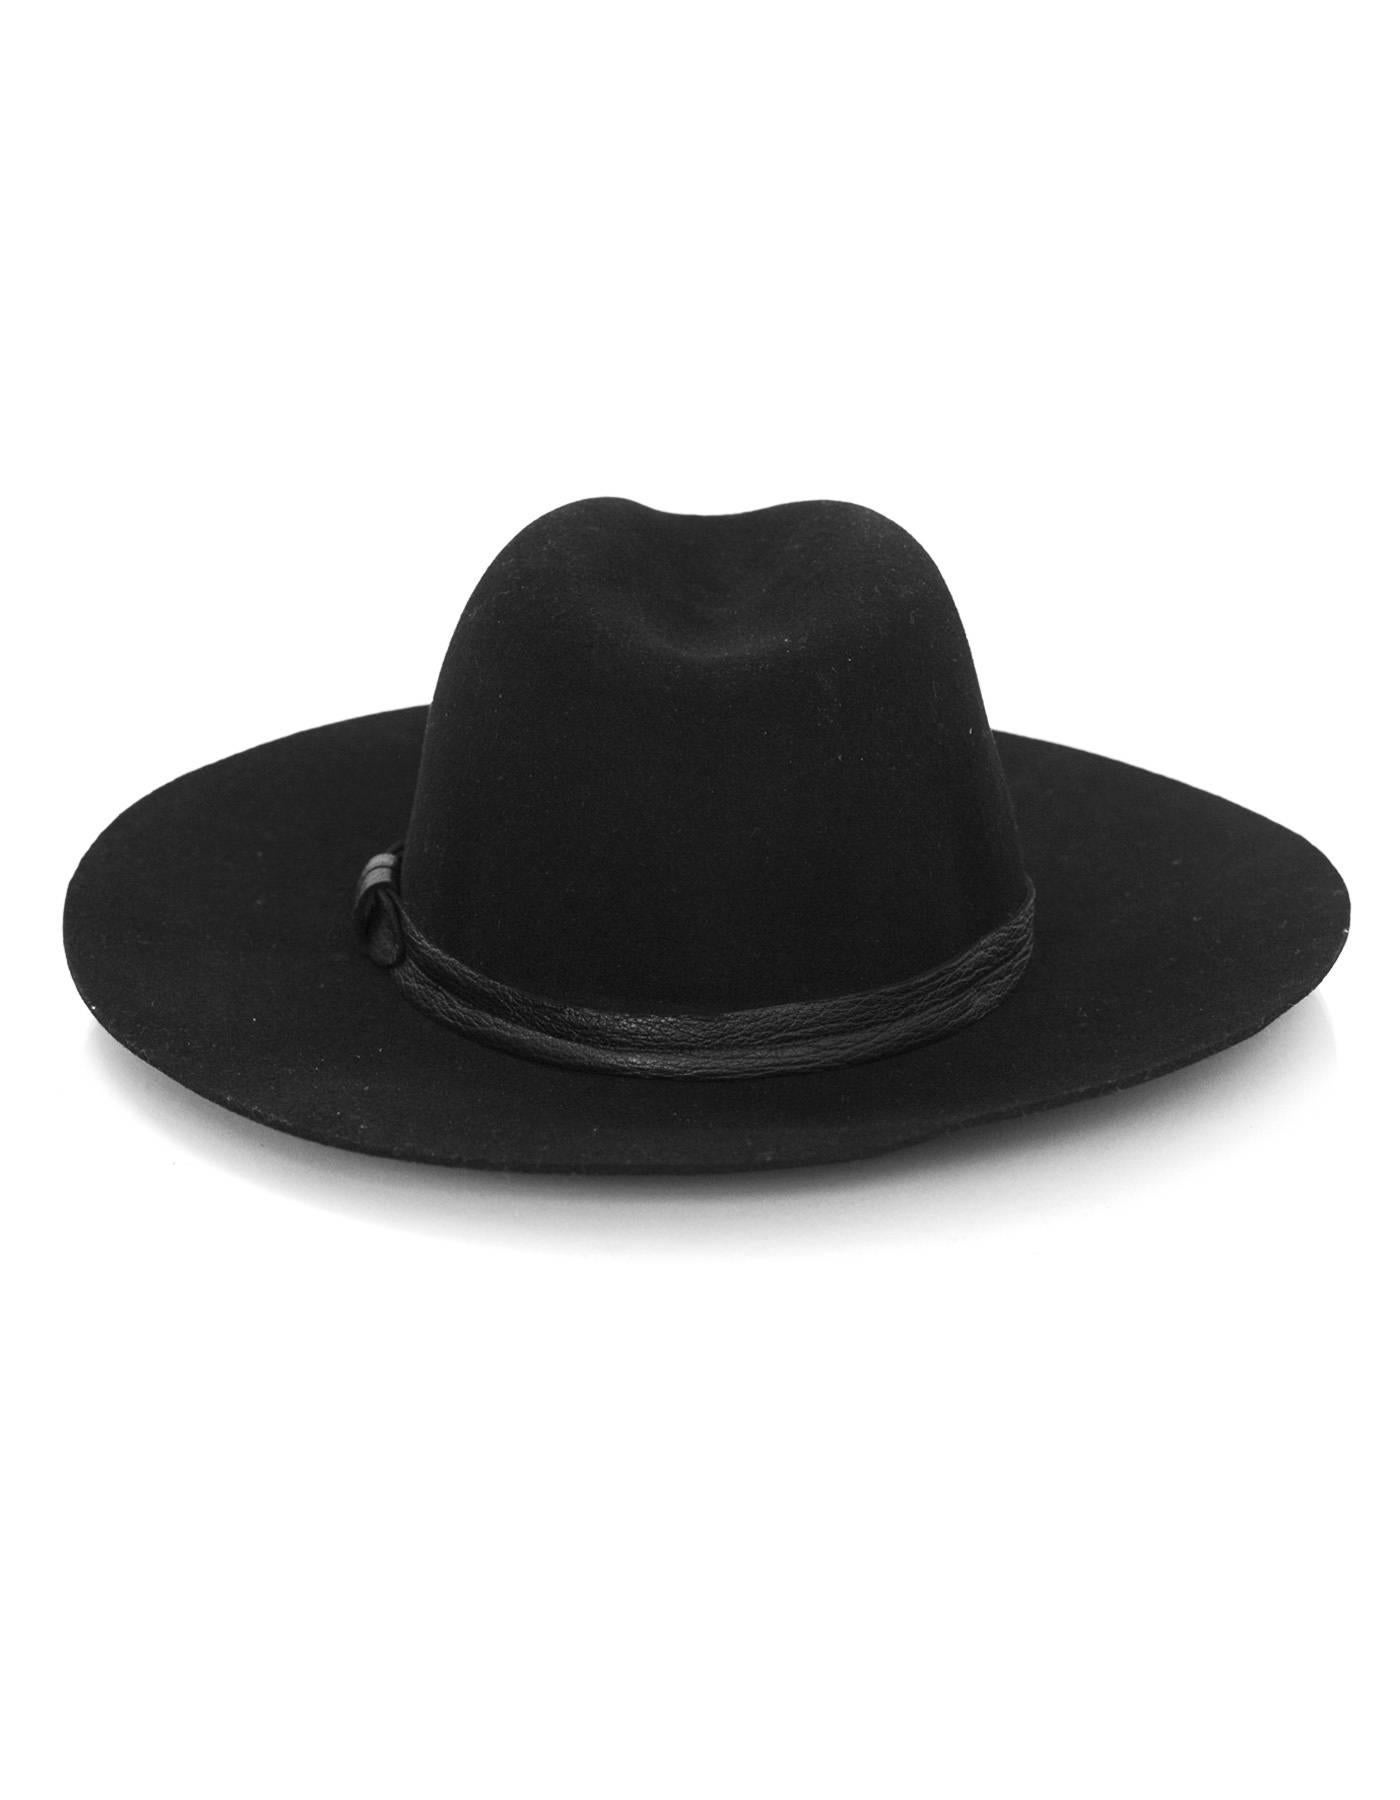 Rag & Bone NEW Black Felt Fedora 
Features leather trim around brim

Made in: USA
Color: Black
Materials: 100% wool
Overall Condition: Excellent- tags still attached

Hat Size: Medium
Diameter: 8"
Circumference: 22.75"
Brim: 3.5"